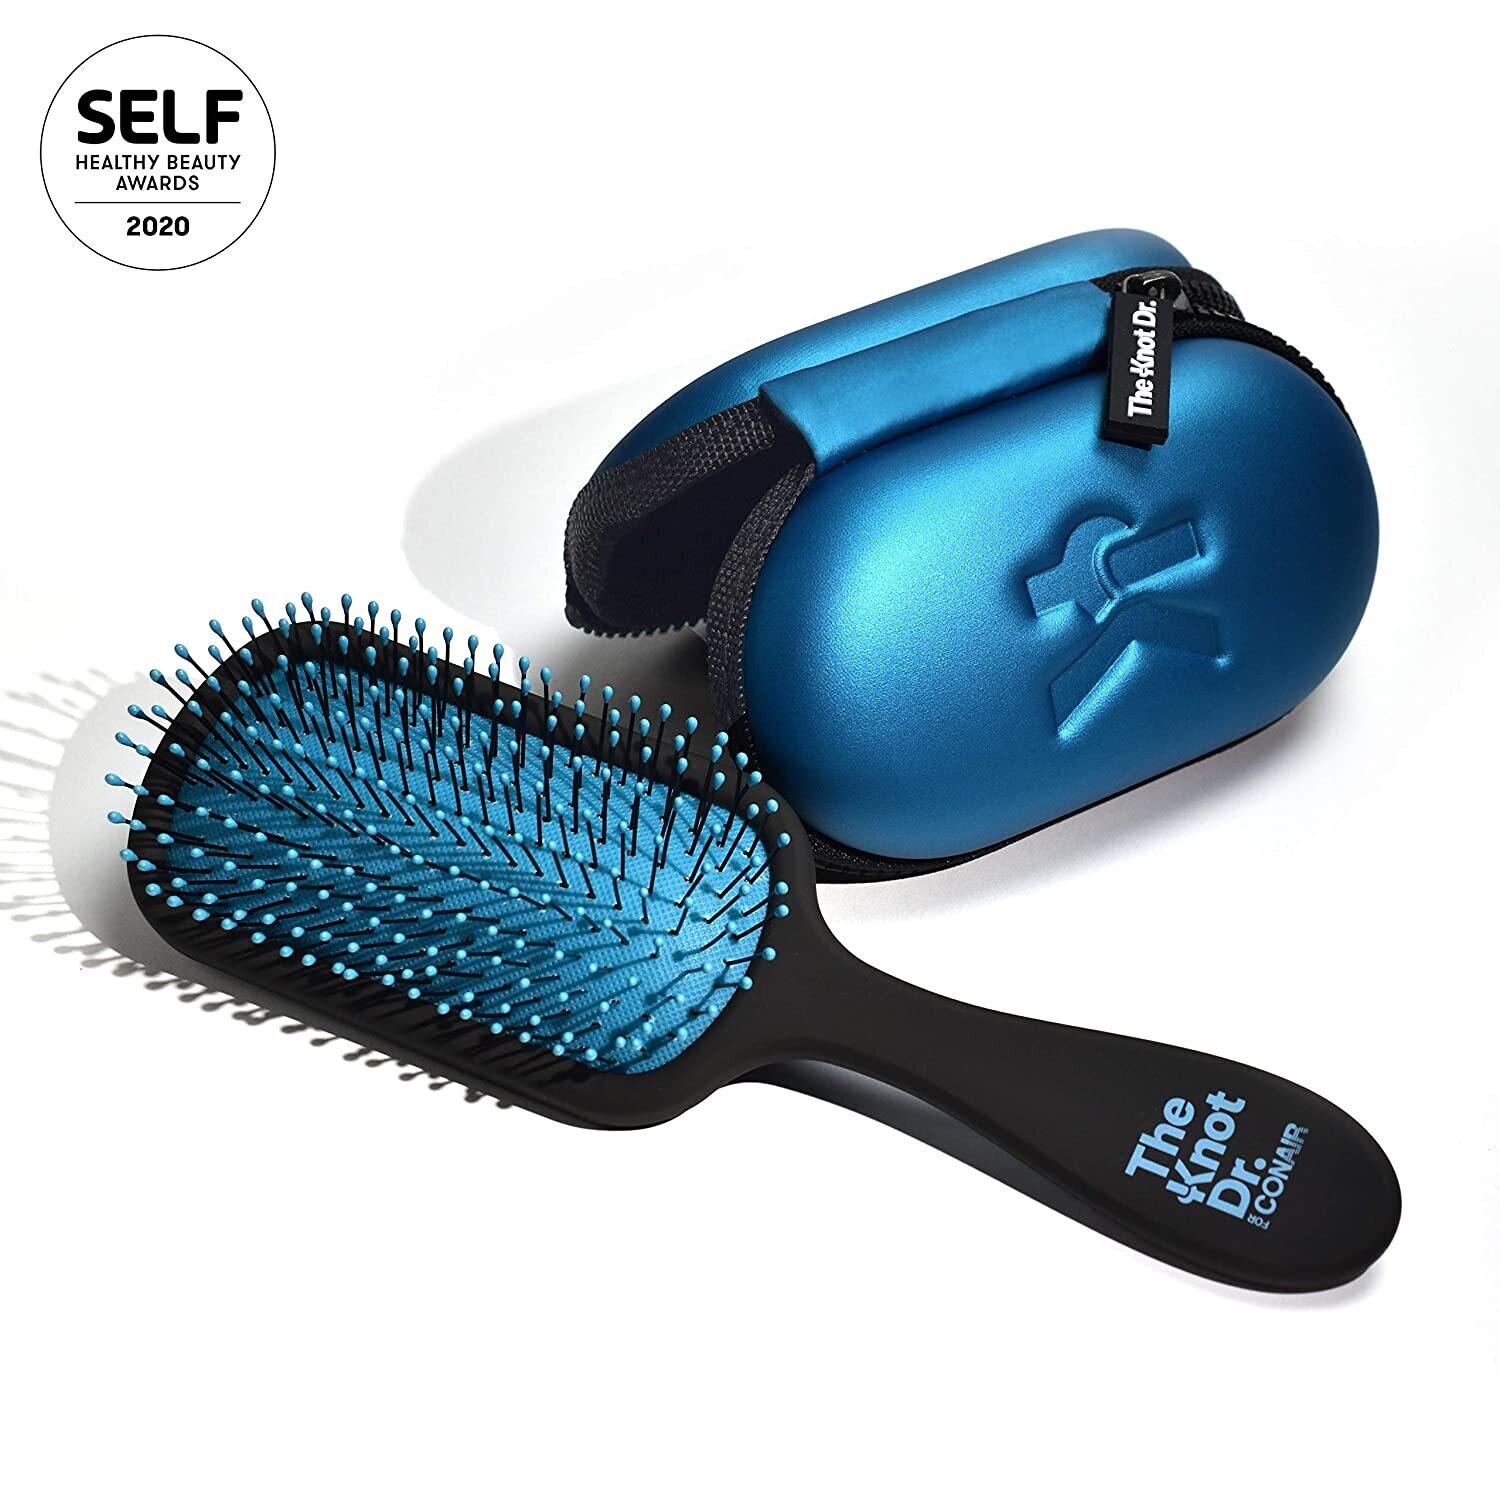 The Knot Dr. for Conair The Pro Detangling Hair Brushes with Case - Blue